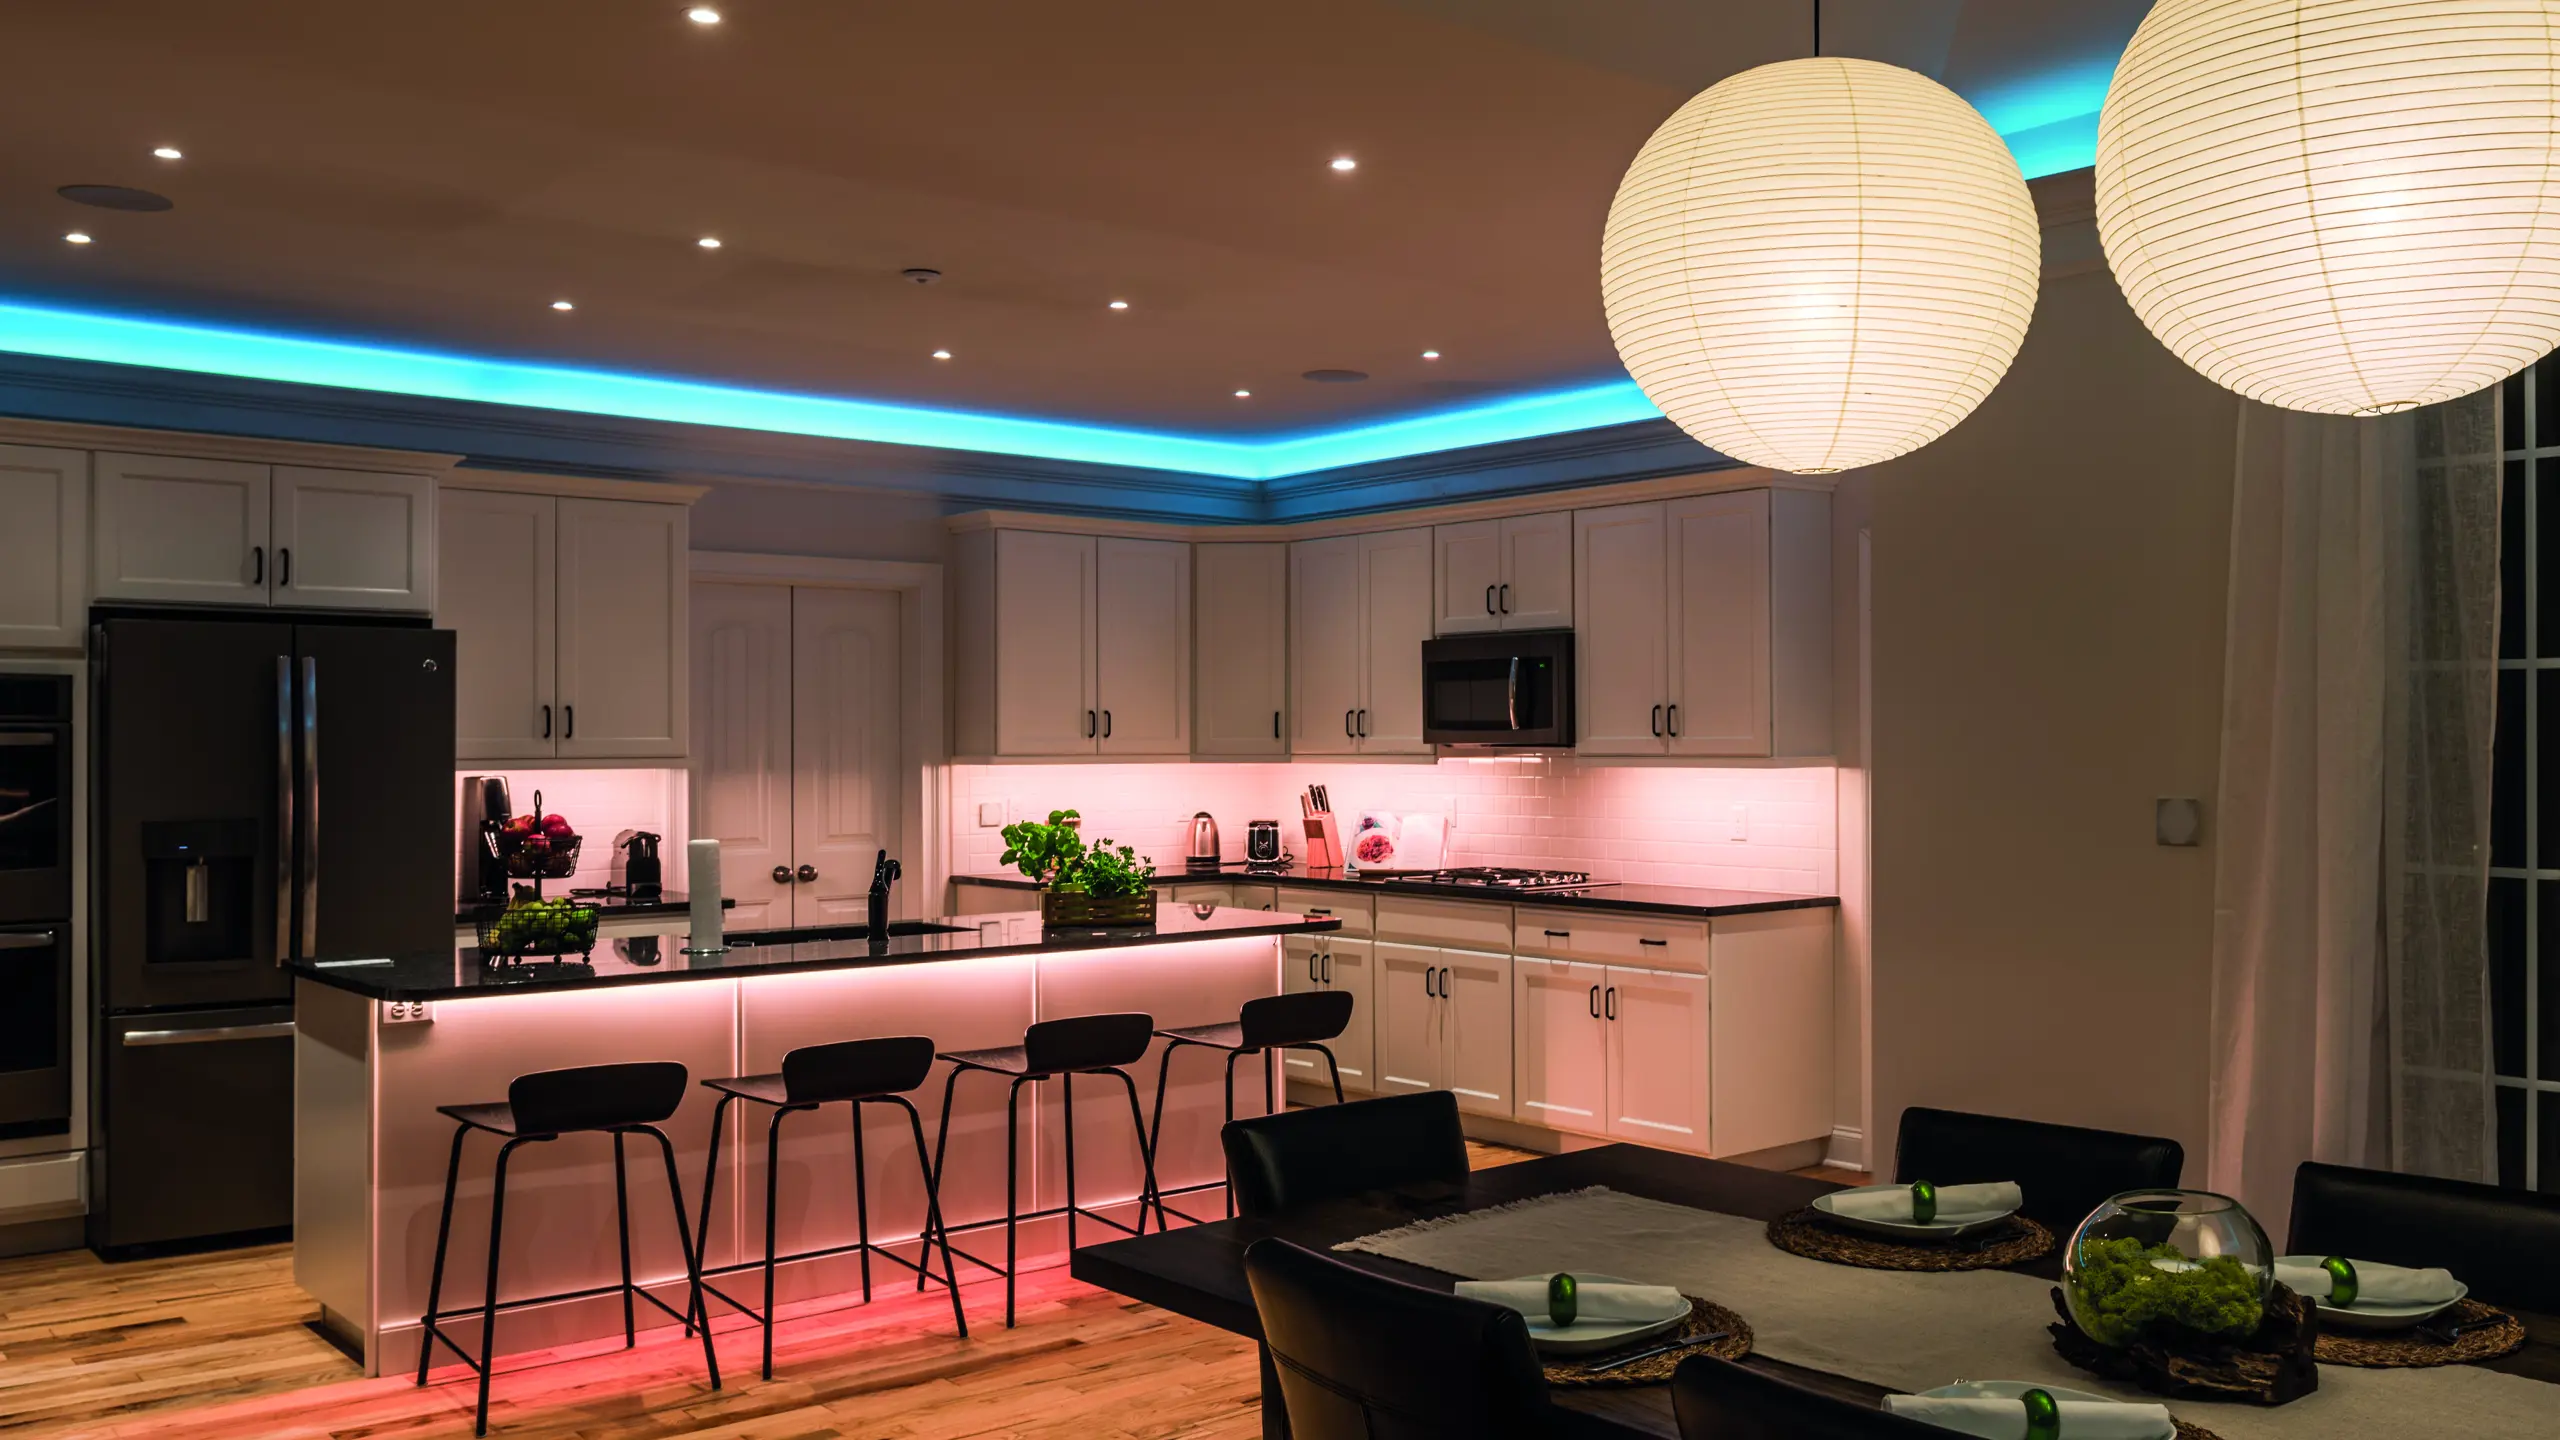 Kitchen with well designed lighting controlled by loxone